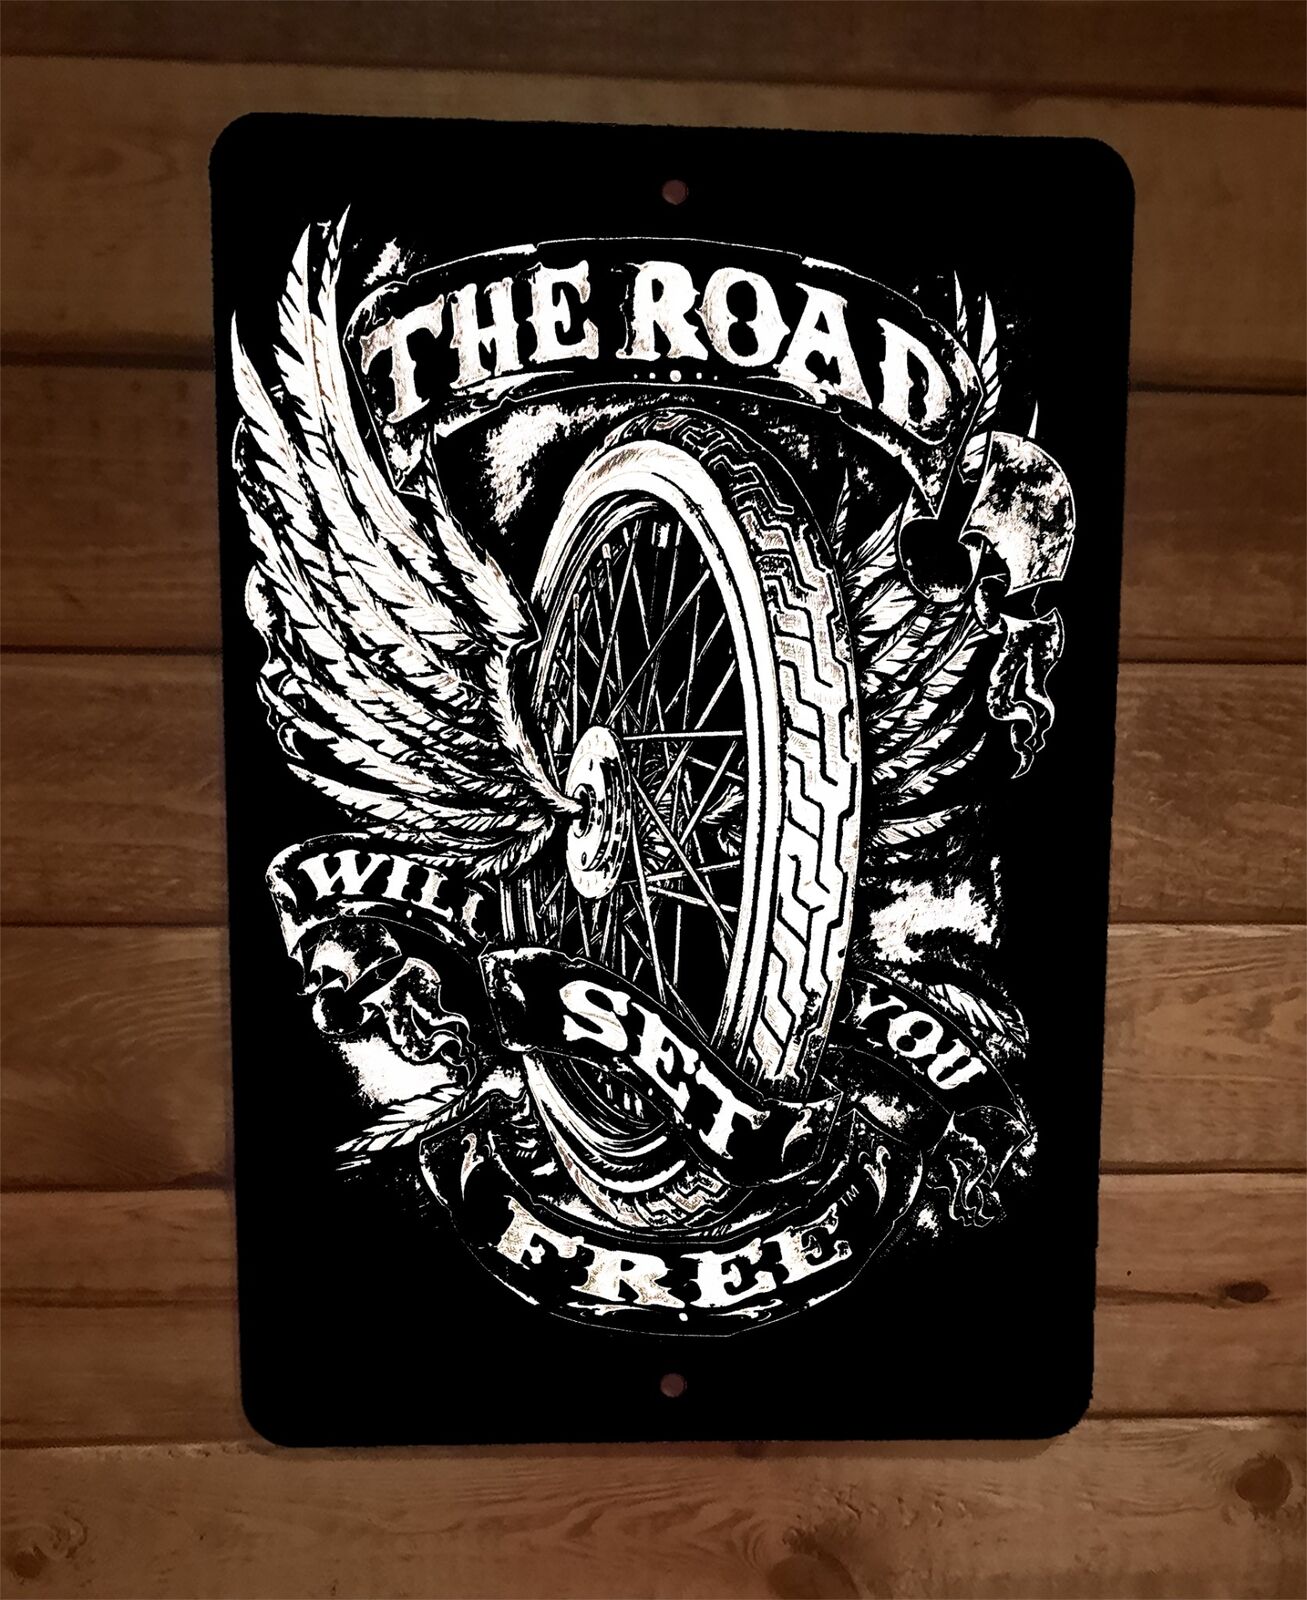 Biker The Road Will Set You Free Motorcycle 8x12 Metal Wall Garage Sign